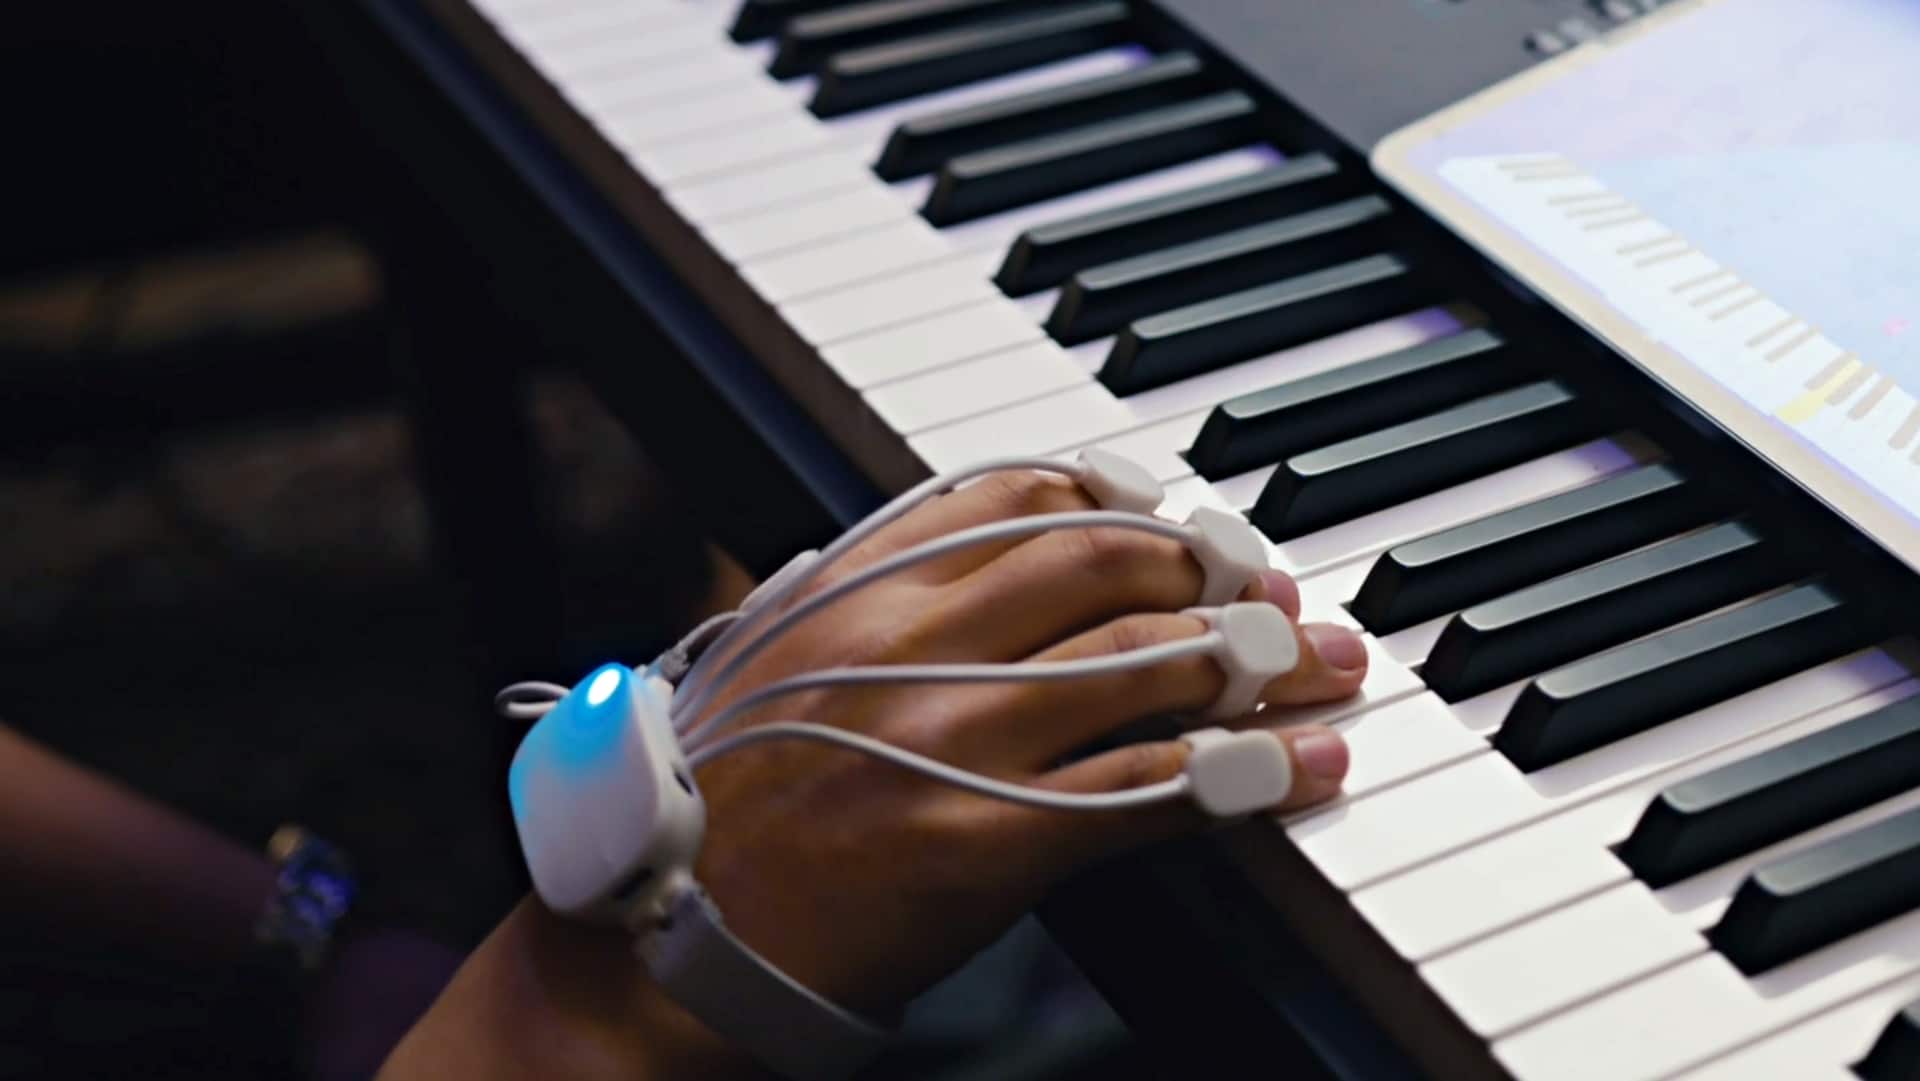 This wearable gaming glove can help stroke patients gain mobility